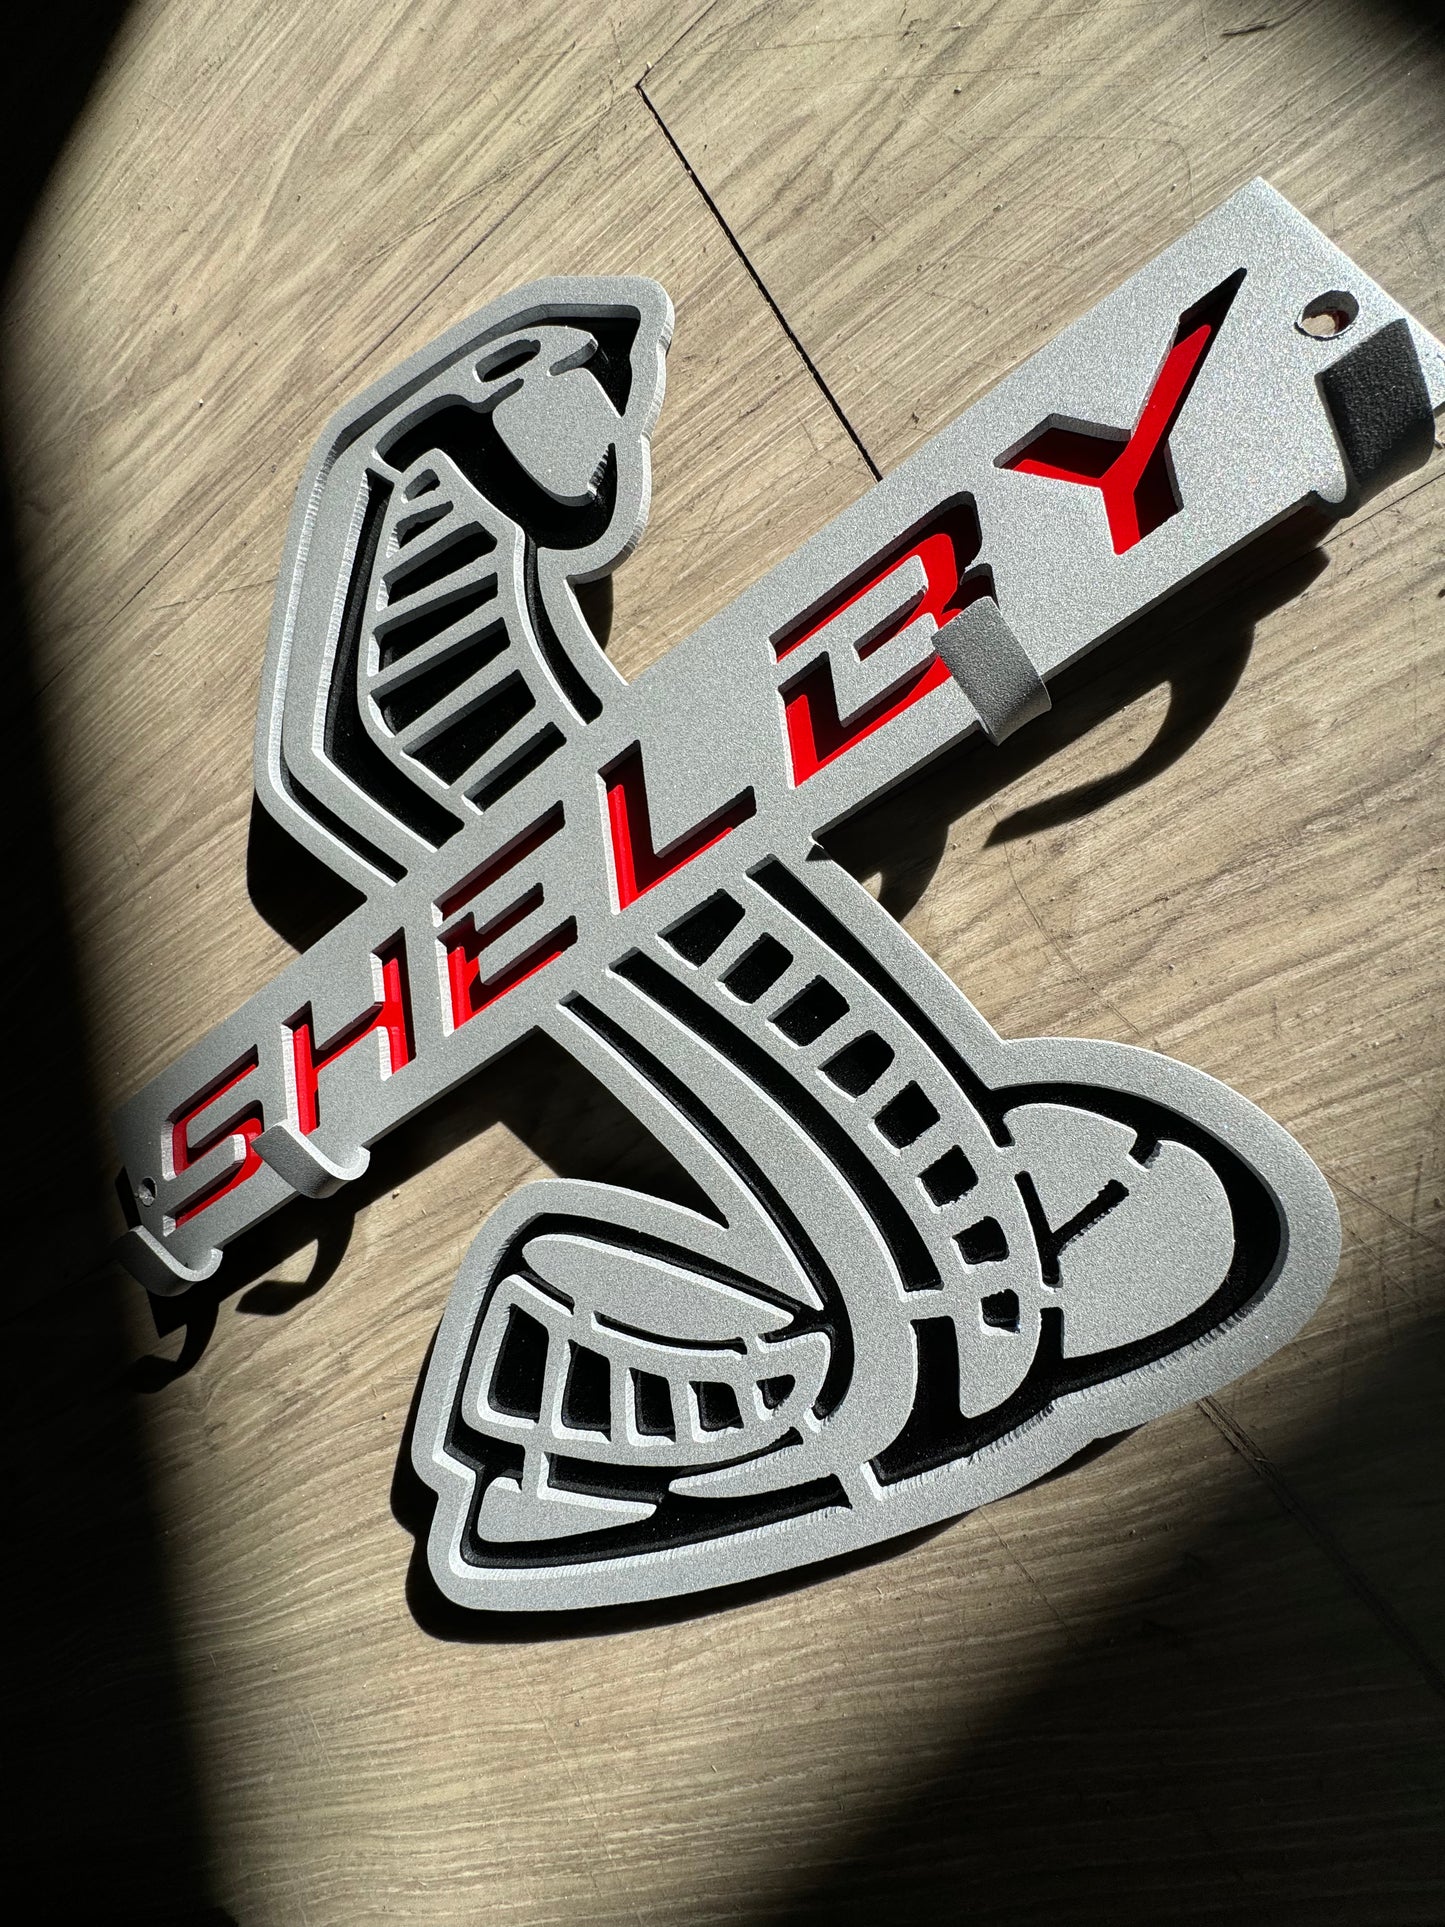 Shelby key hanger rack silver red and black